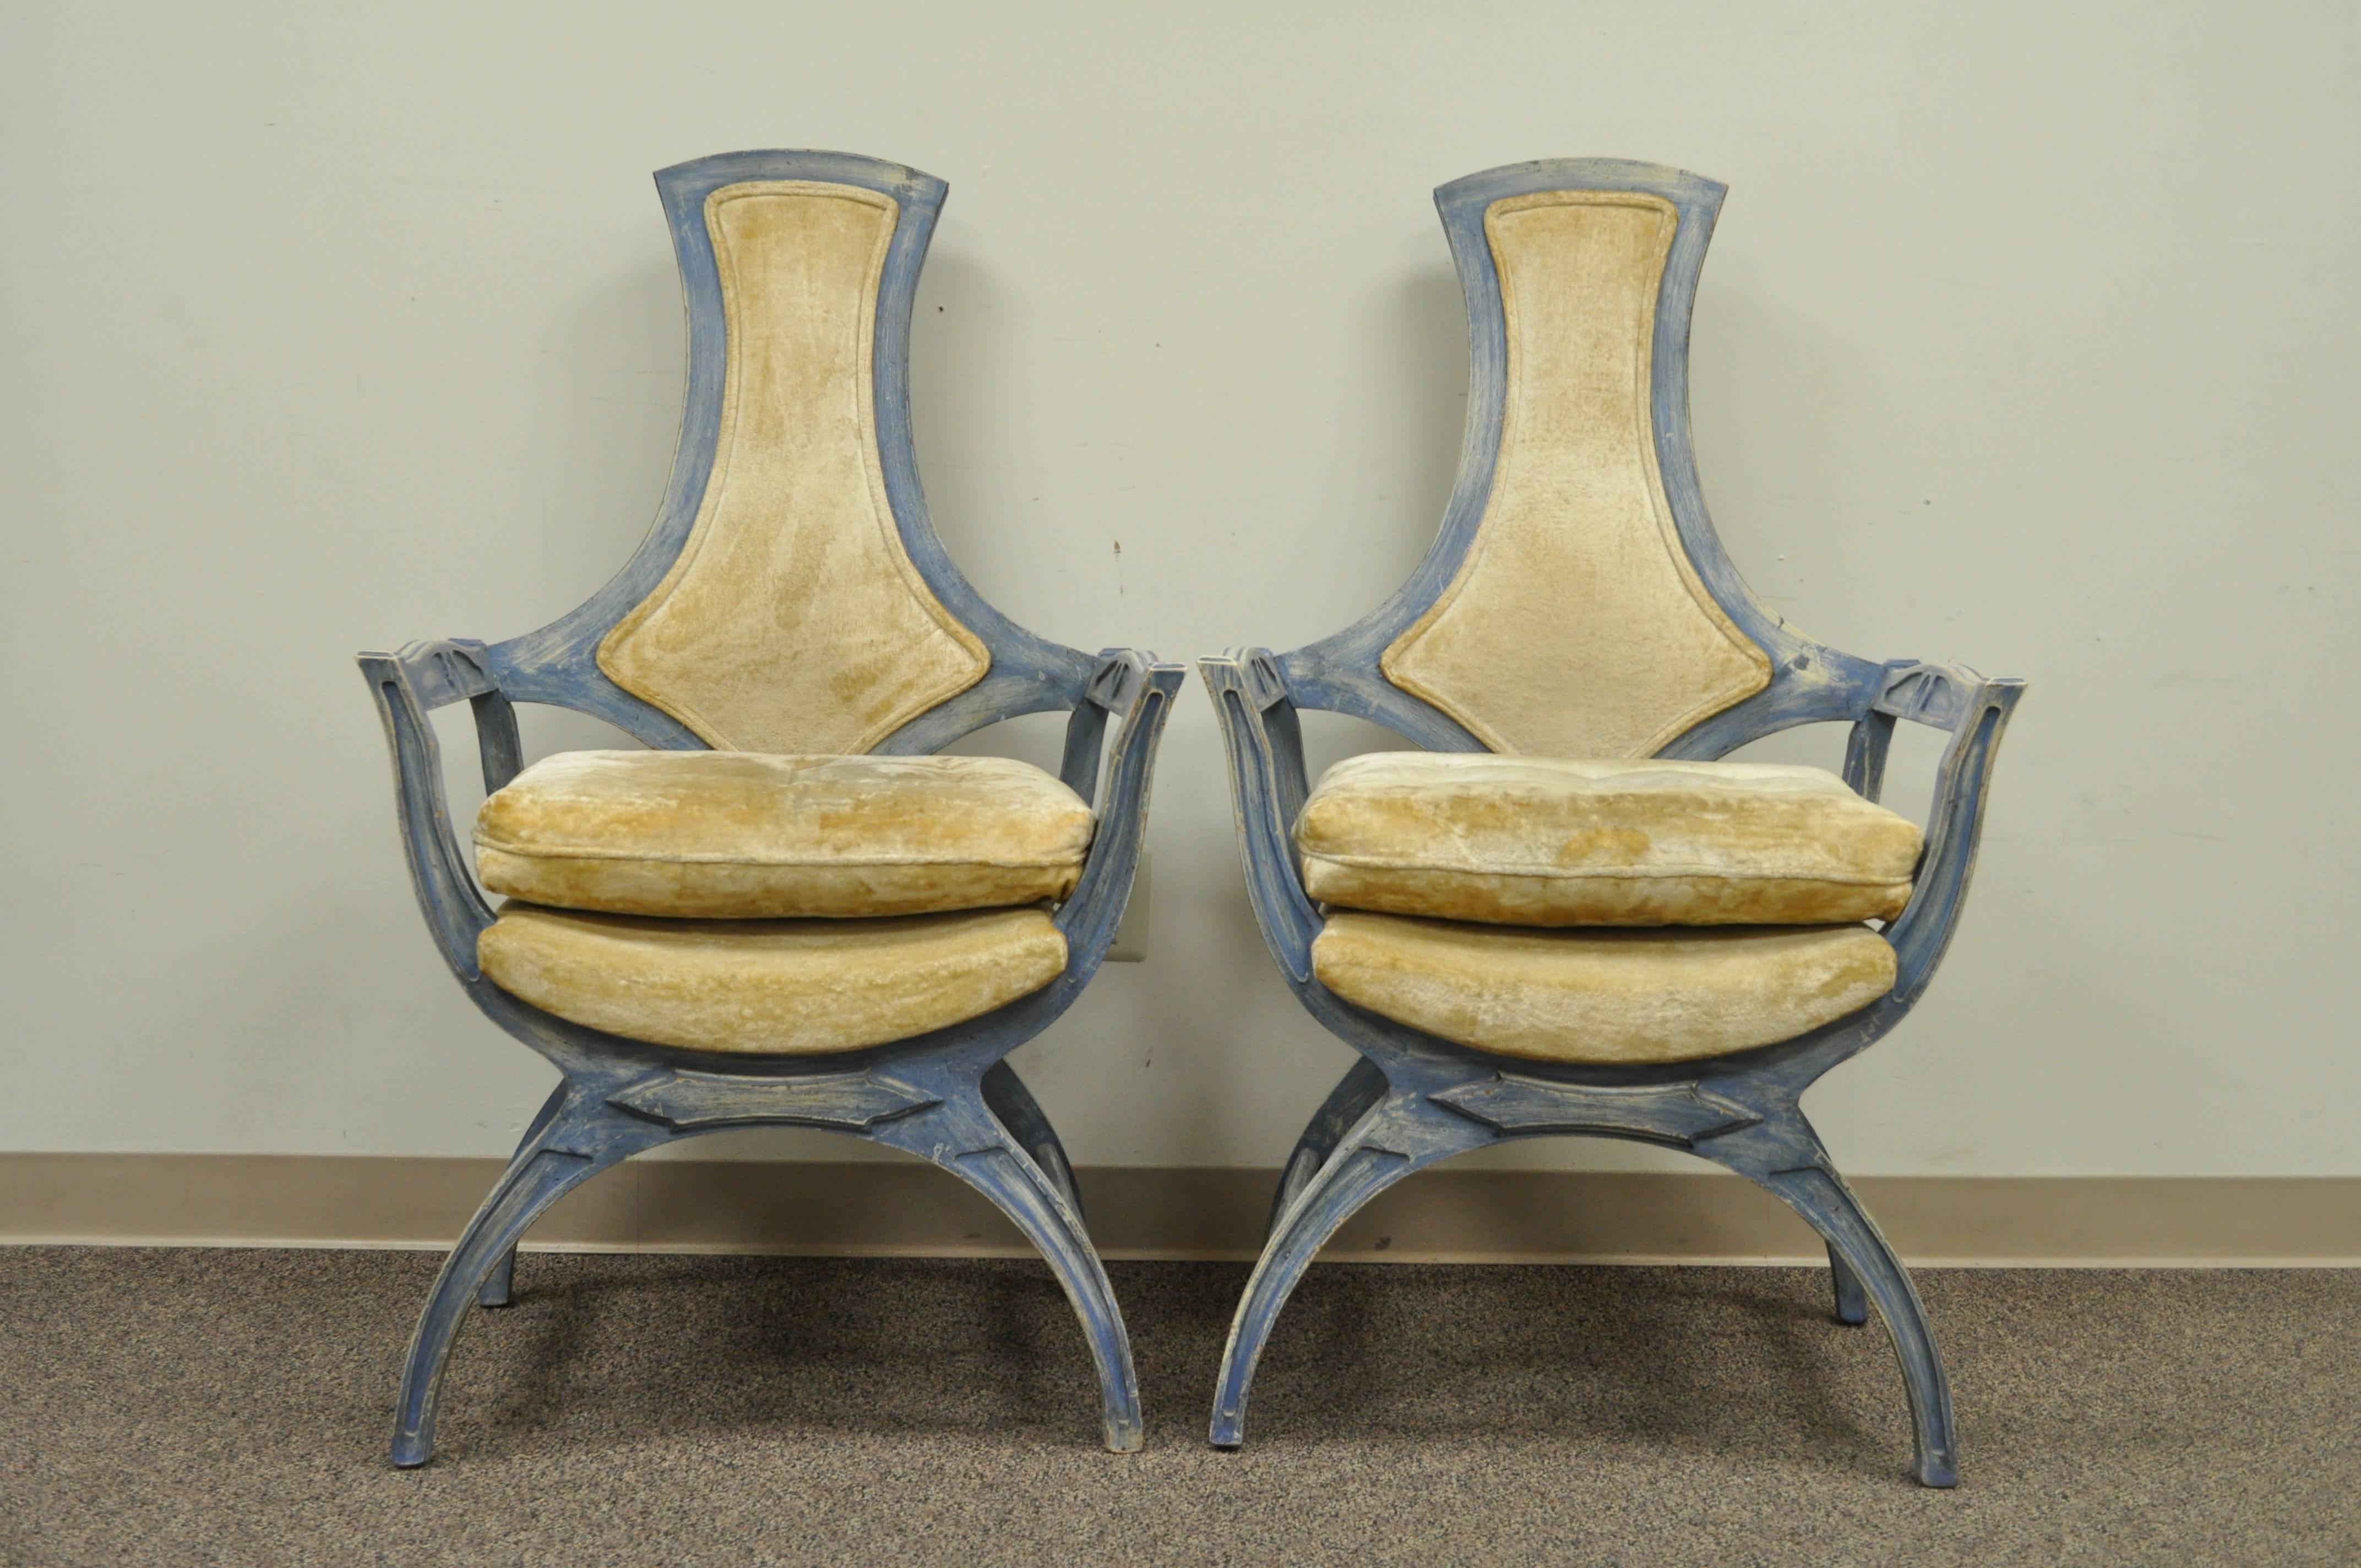 Unique pair of vintage Hollywood Regency Curule or X-form armchairs with a desirable and original blue distress painted finish. The pair features shapely carved open frames and stunning lines. The manufacturer is unconfirmed but the style and